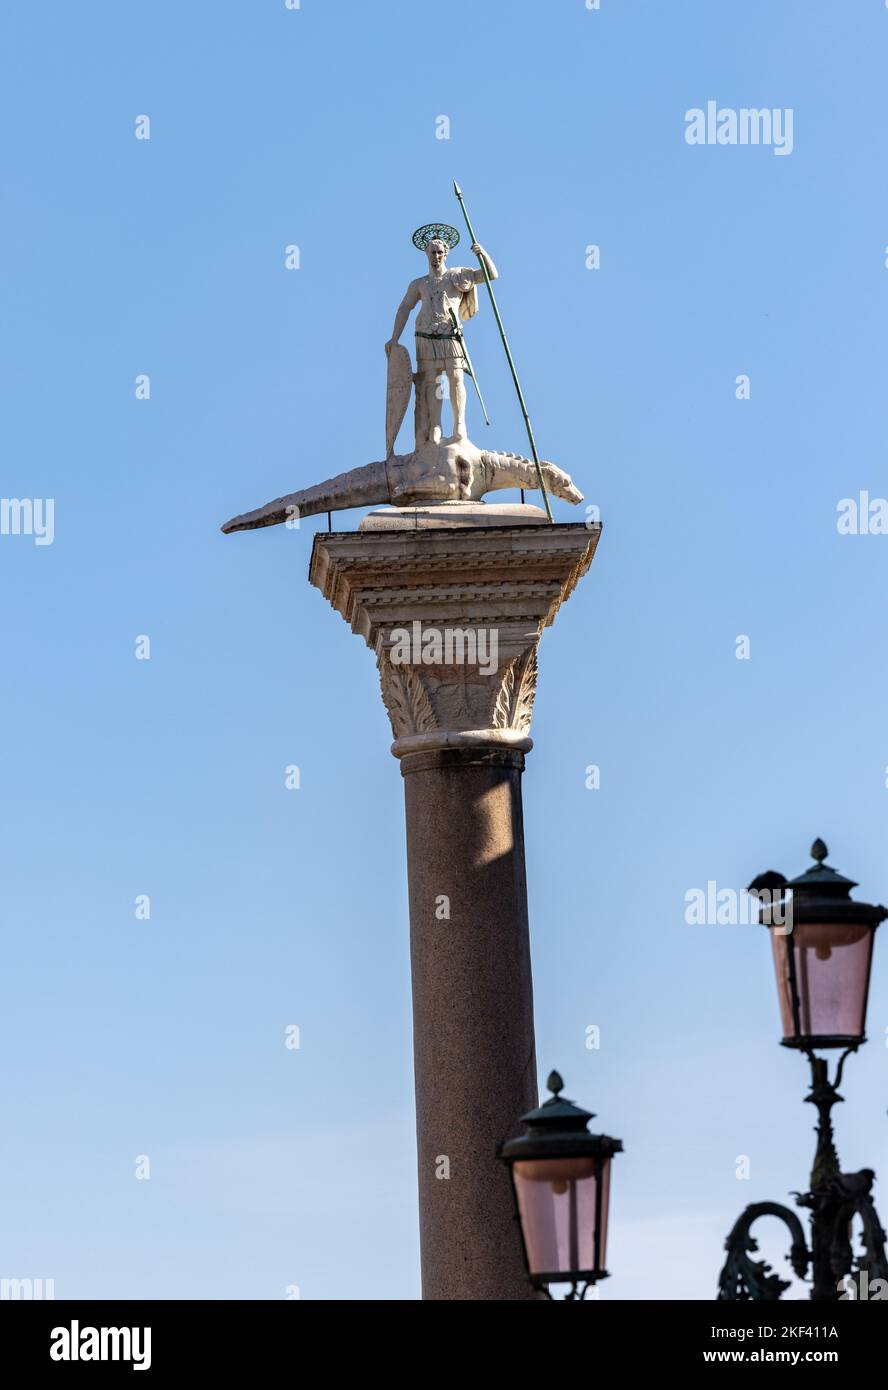 Venice, italy - Piazetta - sculpture of St. Theodore, first patron of Venice Stock Photo